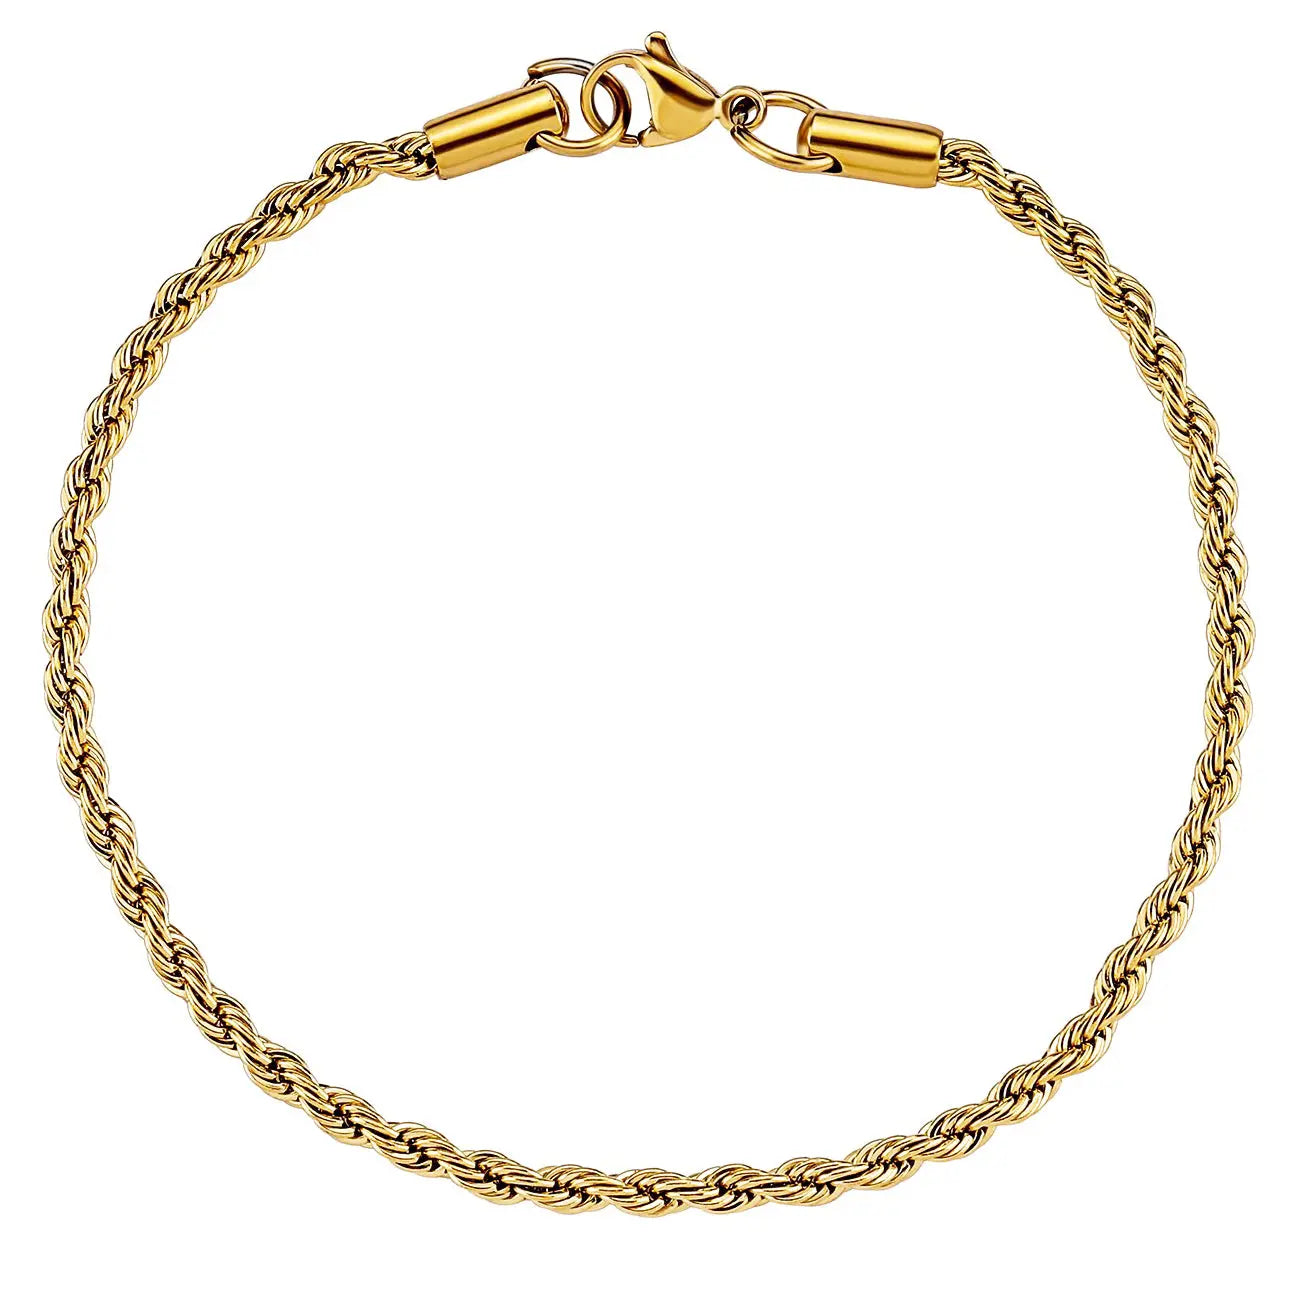 3mm Rope Bracelet in Yellow Gold 922.8cm  The Icetruck